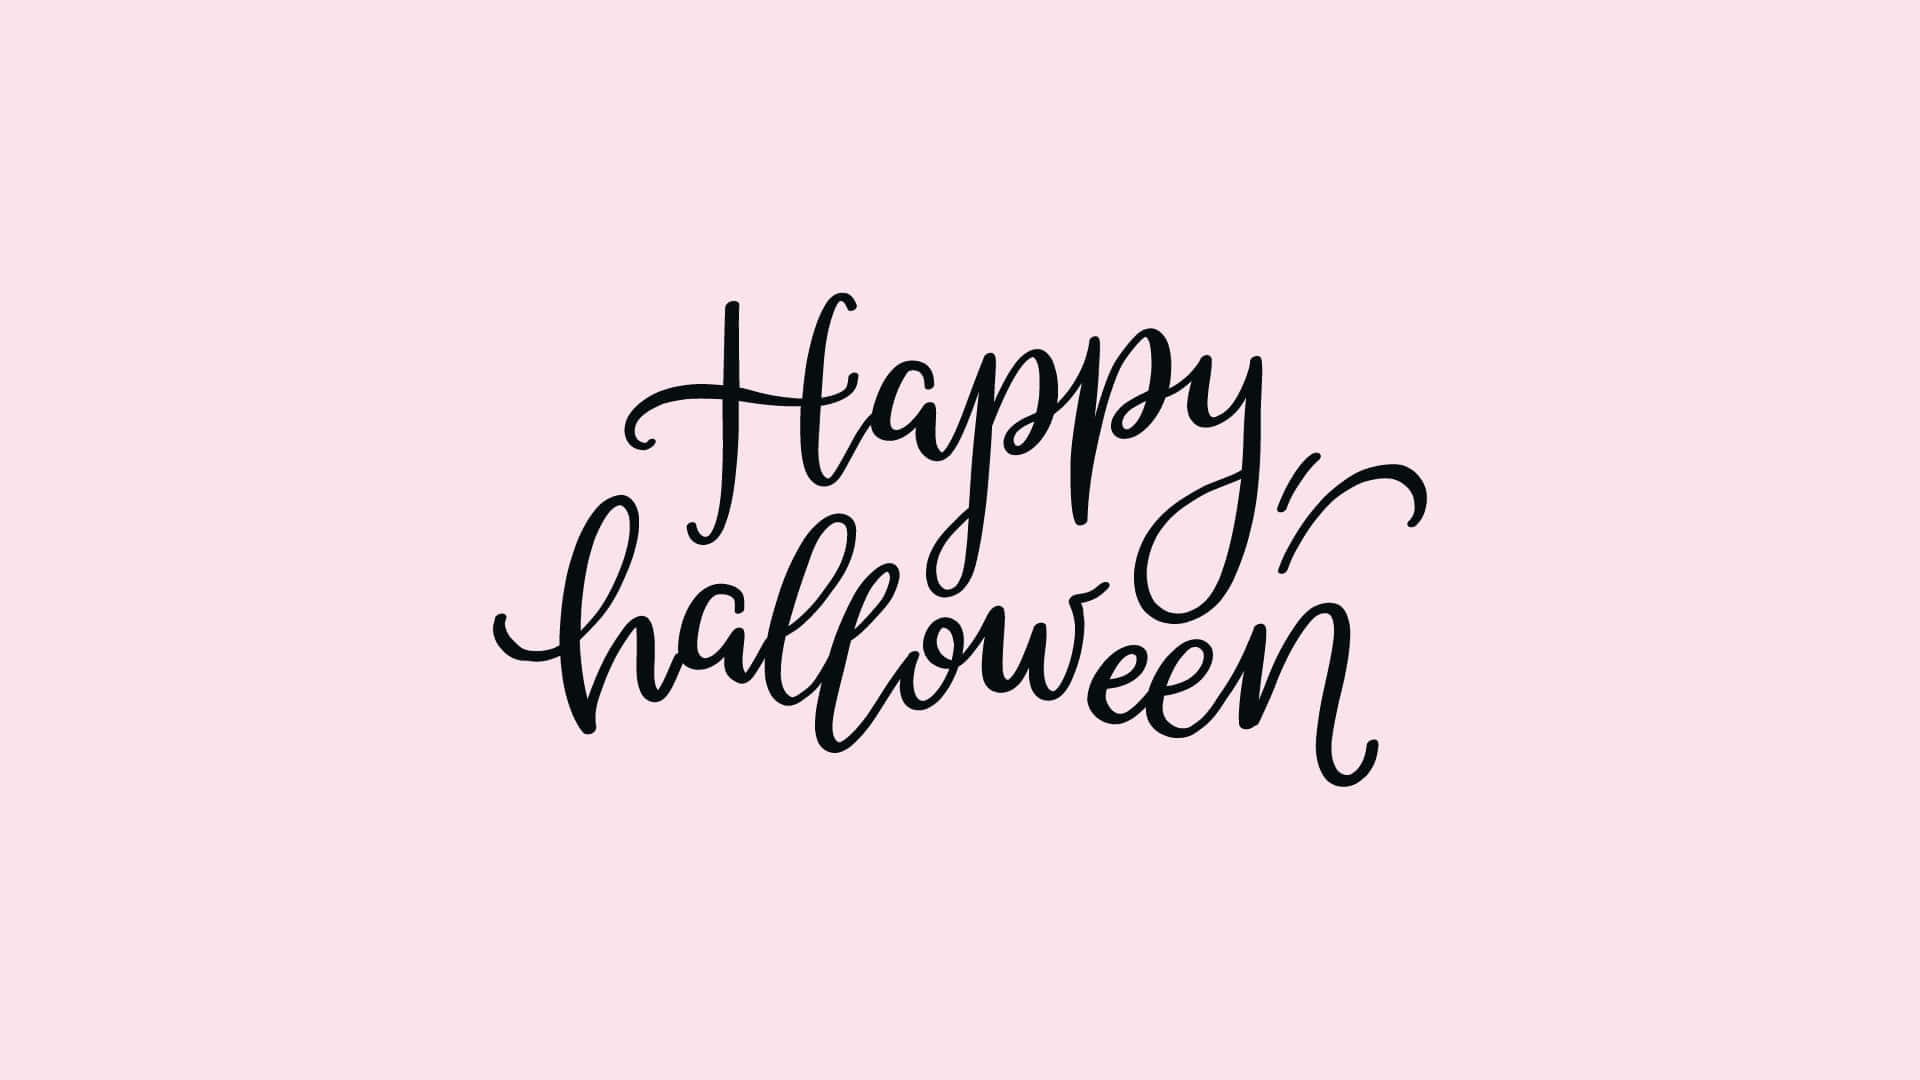 Have A Happy And Girly Halloween! Wallpaper